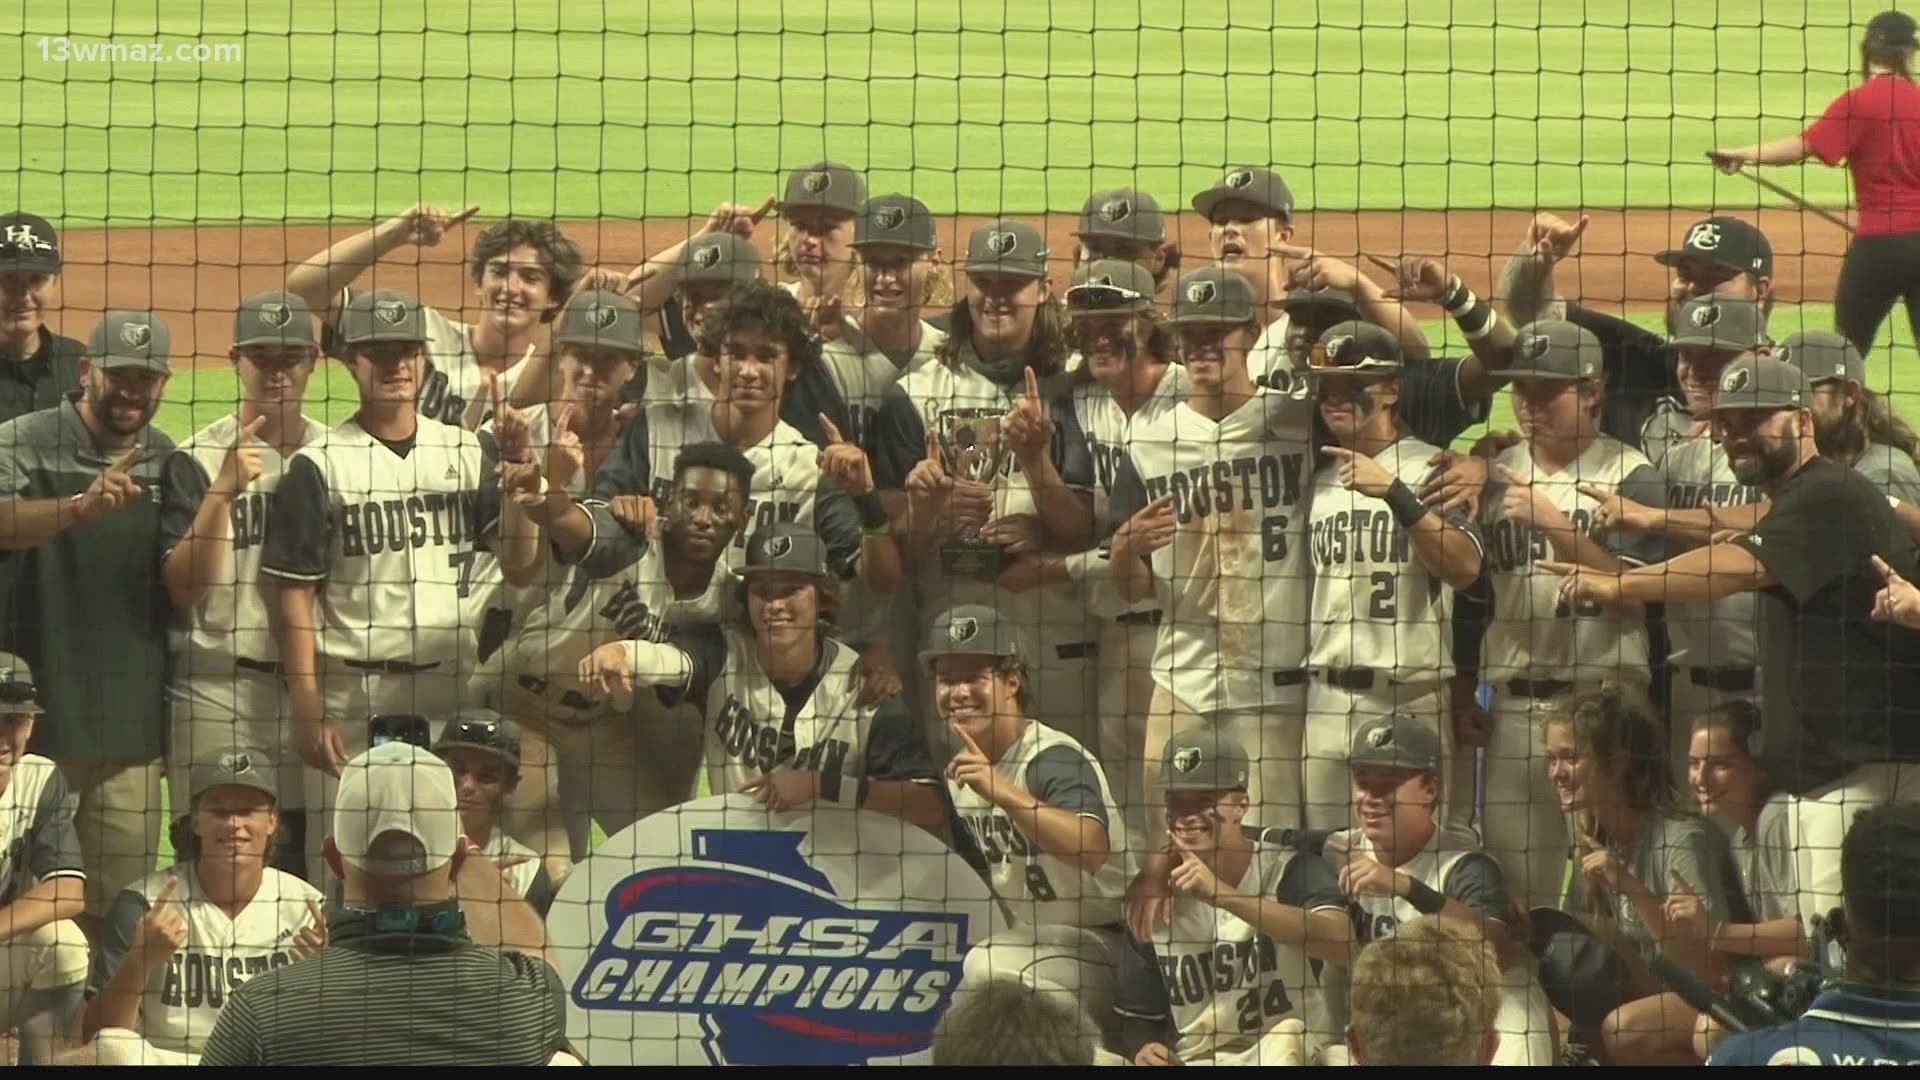 The Bears won the 6A GHSA state championship by sweeping Lassiter 2-1 and 4-0, claiming their third diamond title since 2016